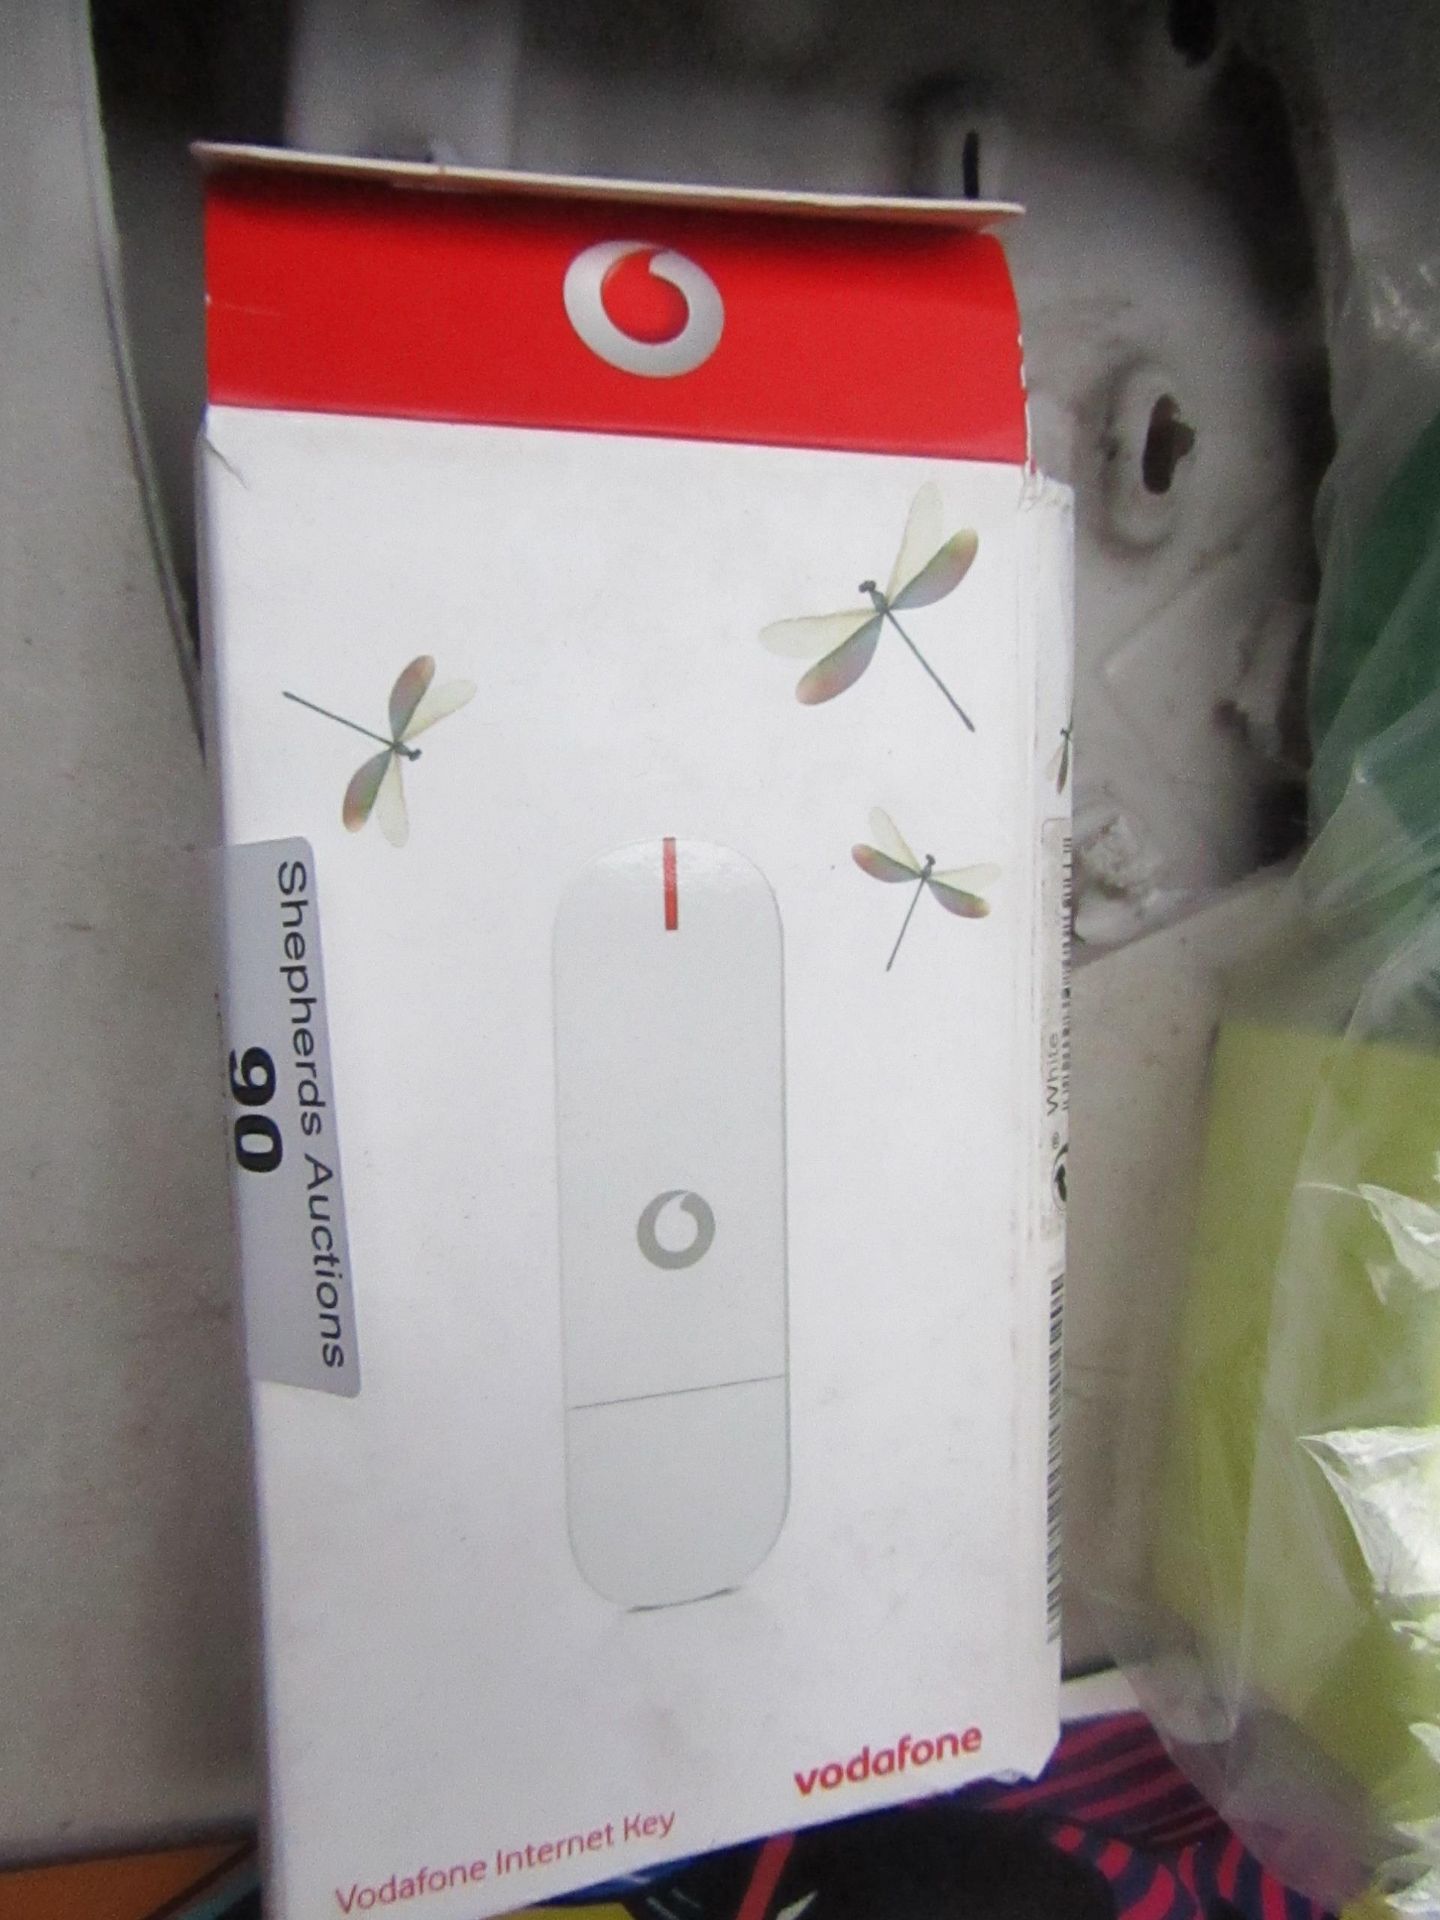 Vodafone internet key, untested and boxed.